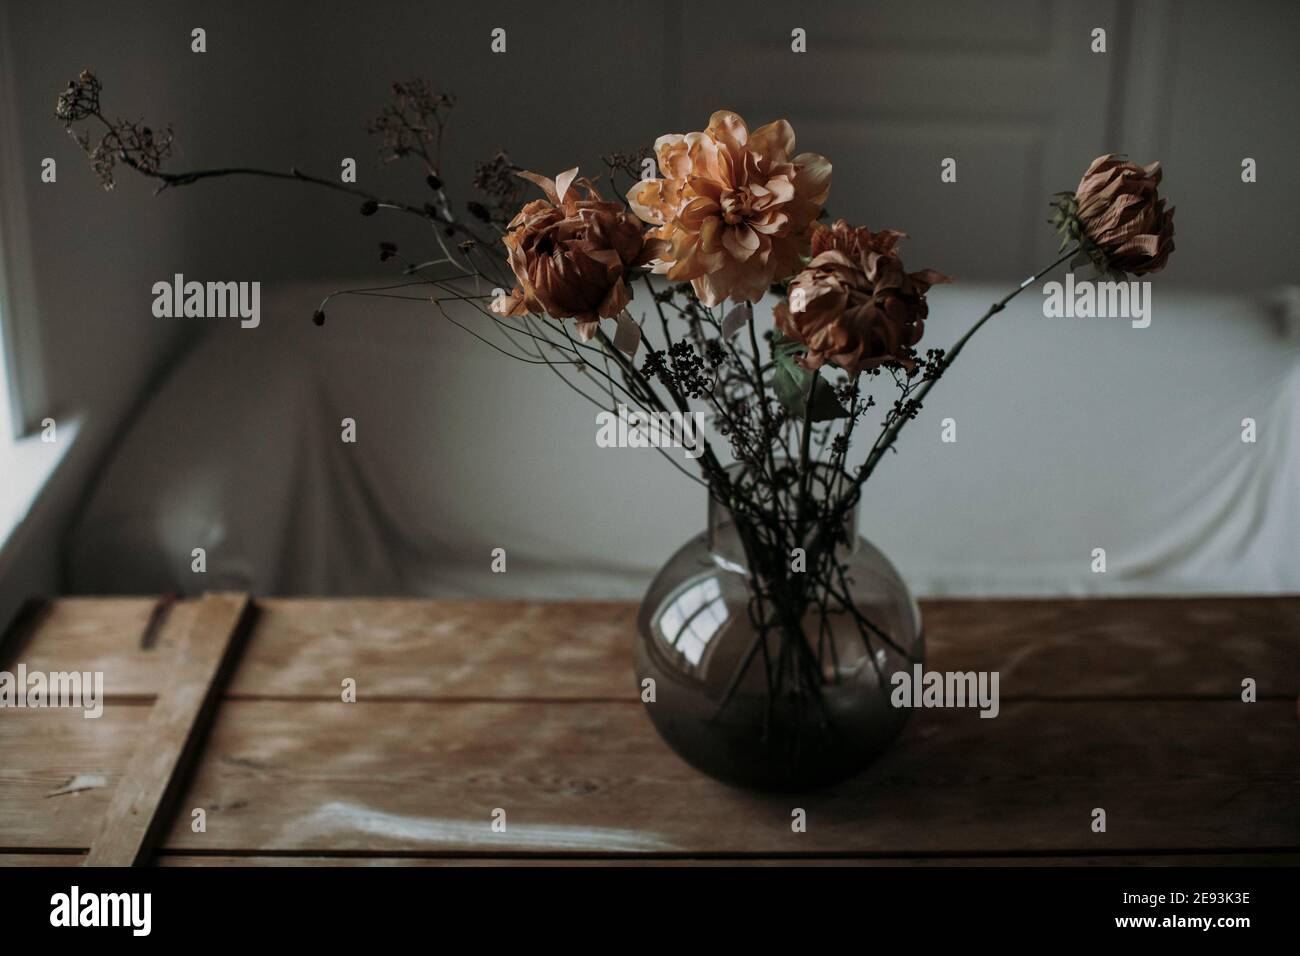 Dried flowers in vase at table Stock Photo